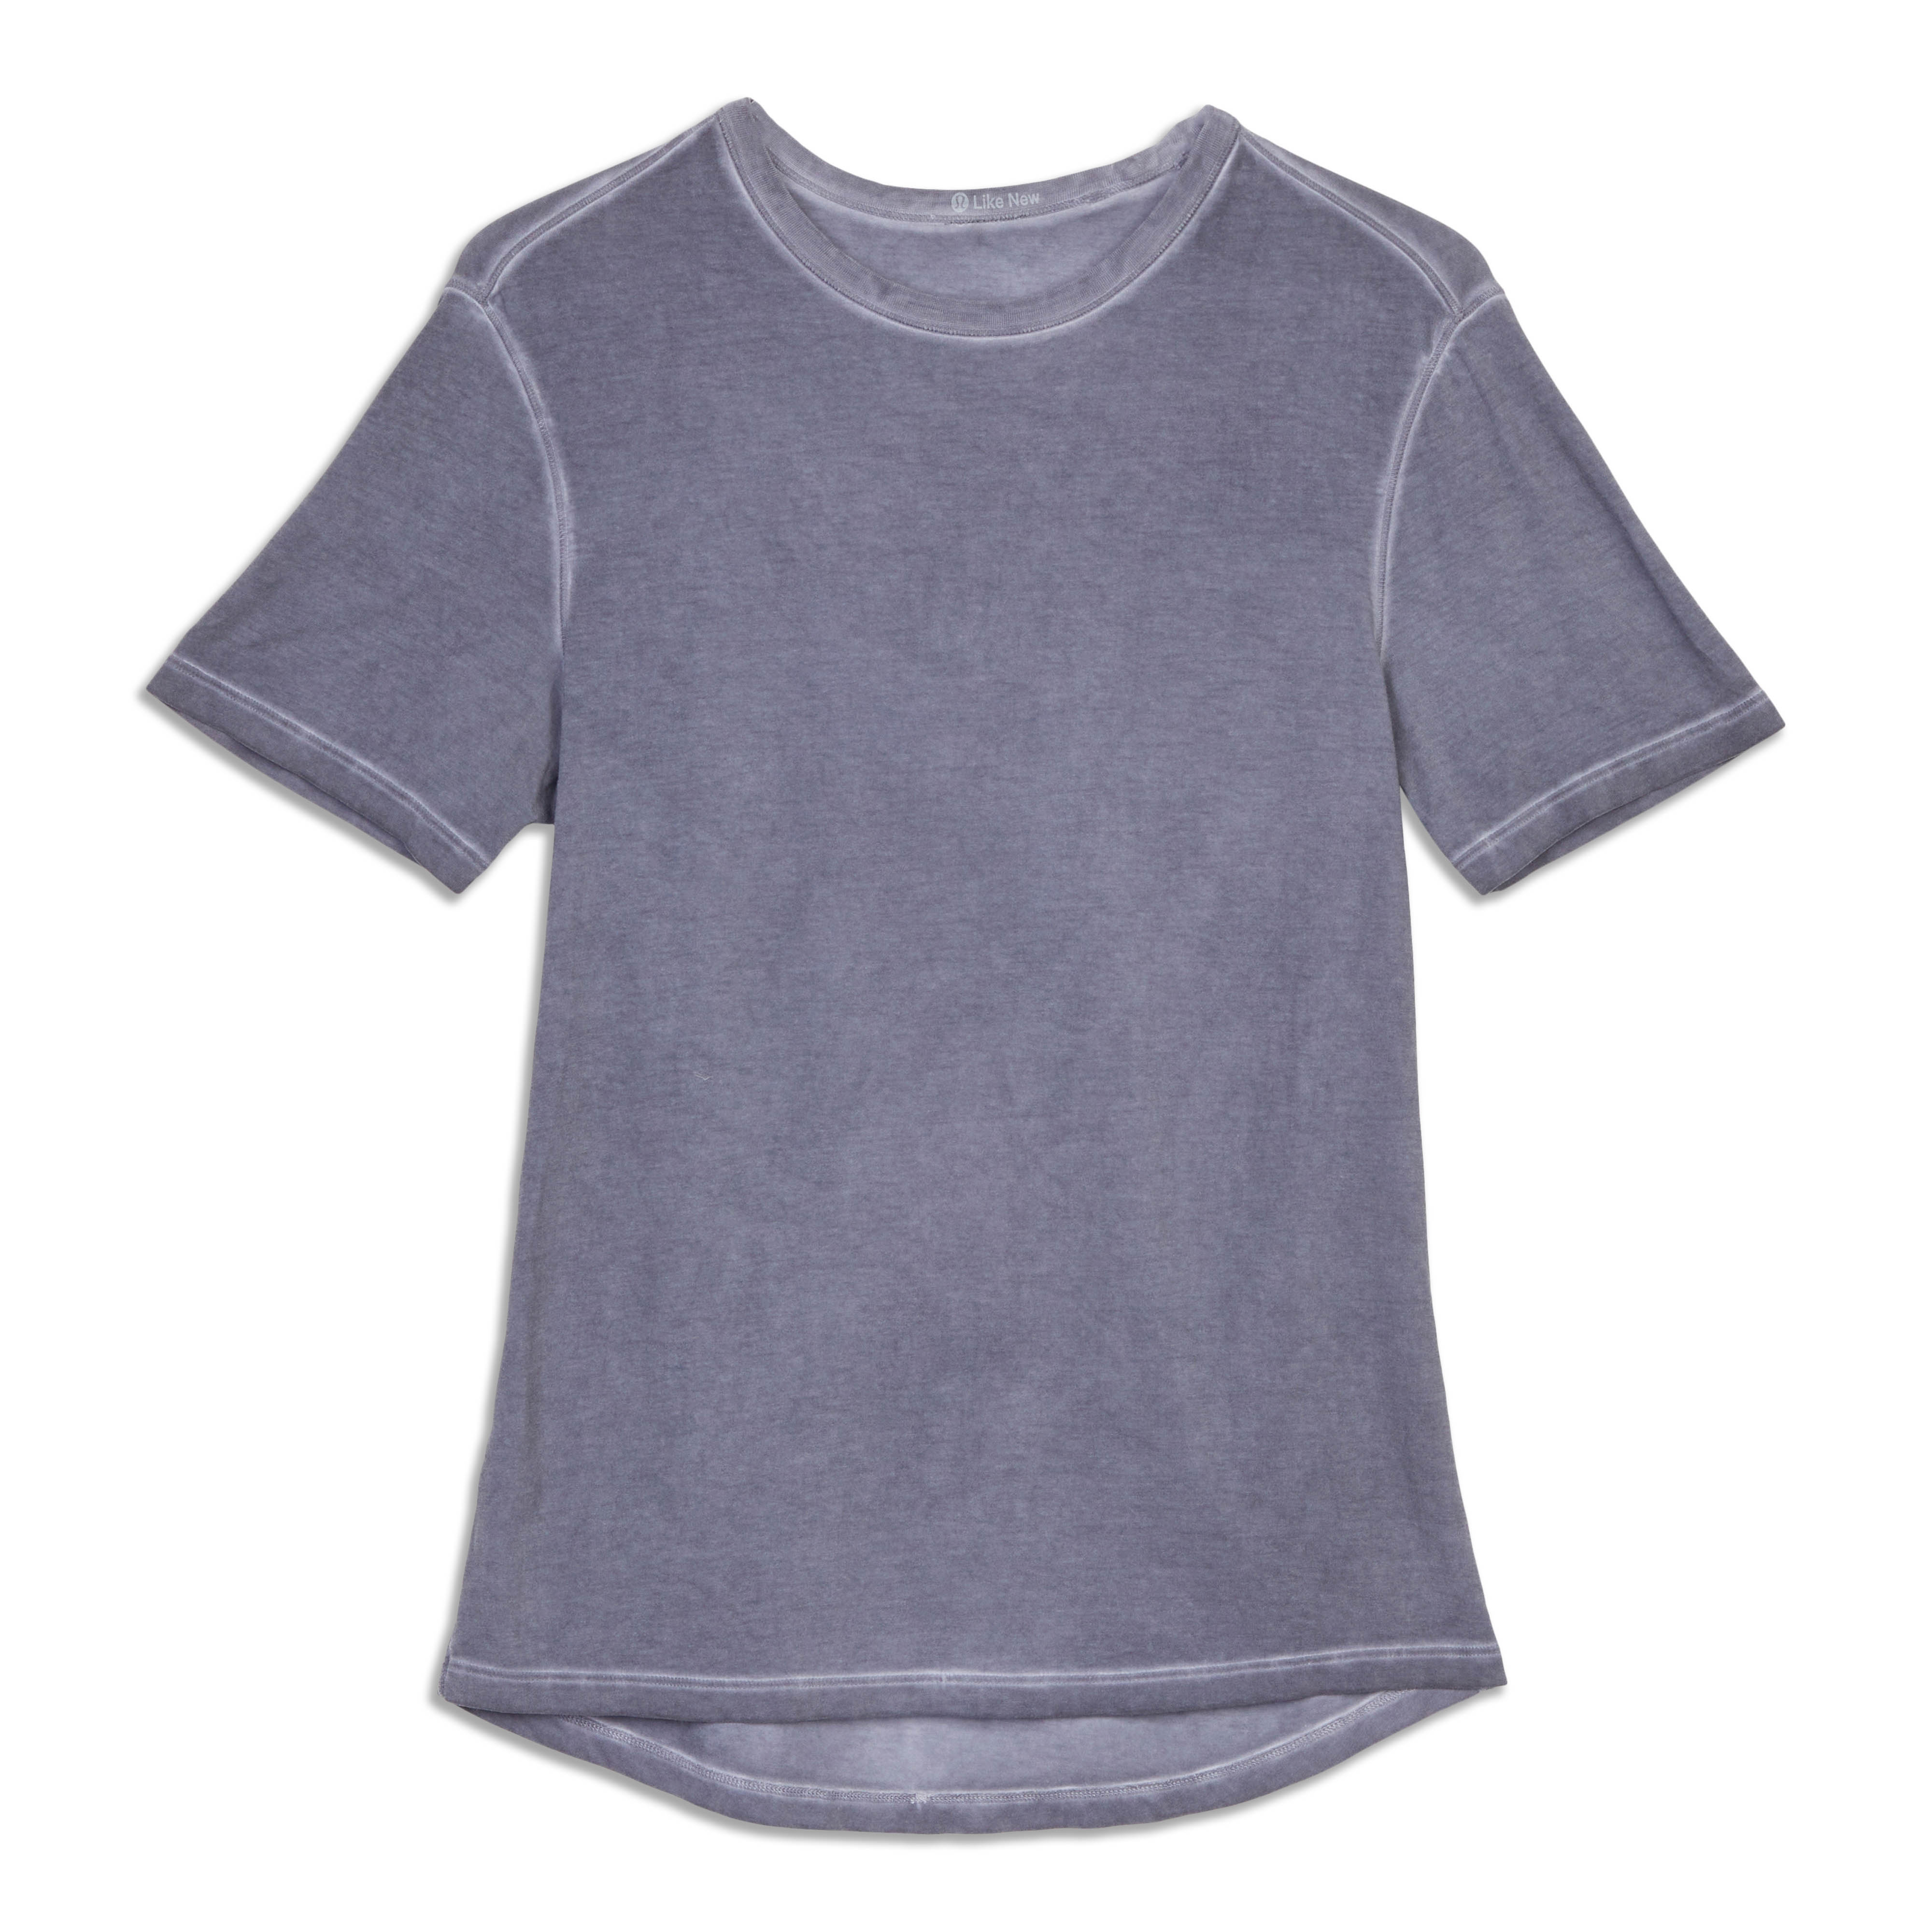 lululemon Released A Fresh New Colorway In Its 5 Year Basic Tee Pack